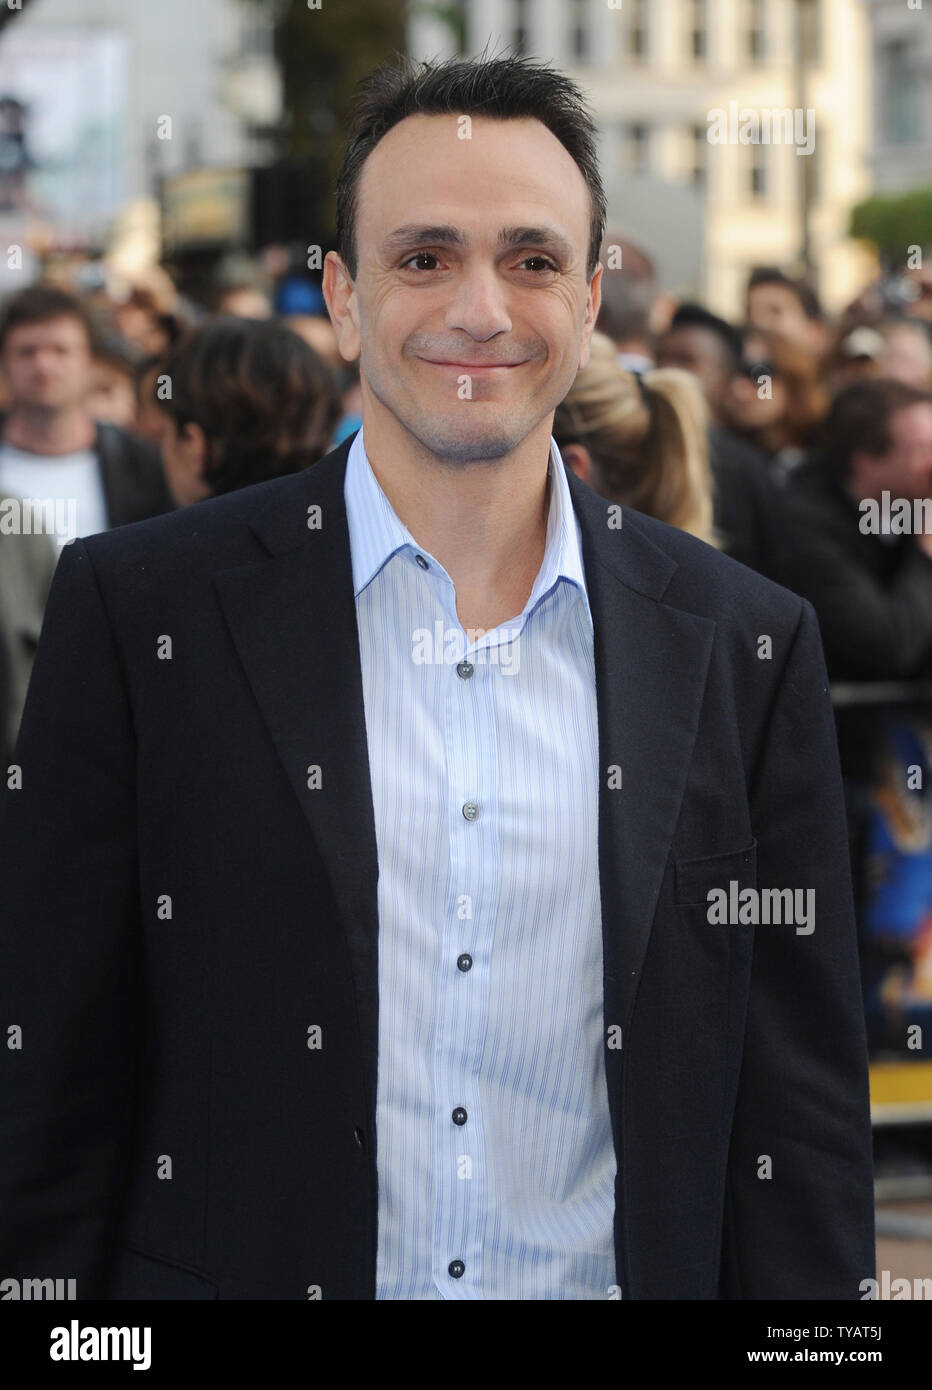 American actor Hank Azaria attend the World premiere of "Night at the museum 2" at Empire, Leicester Square in London on May 12, 2009.  (UPI Photo/Rune Hellestad) Stock Photo